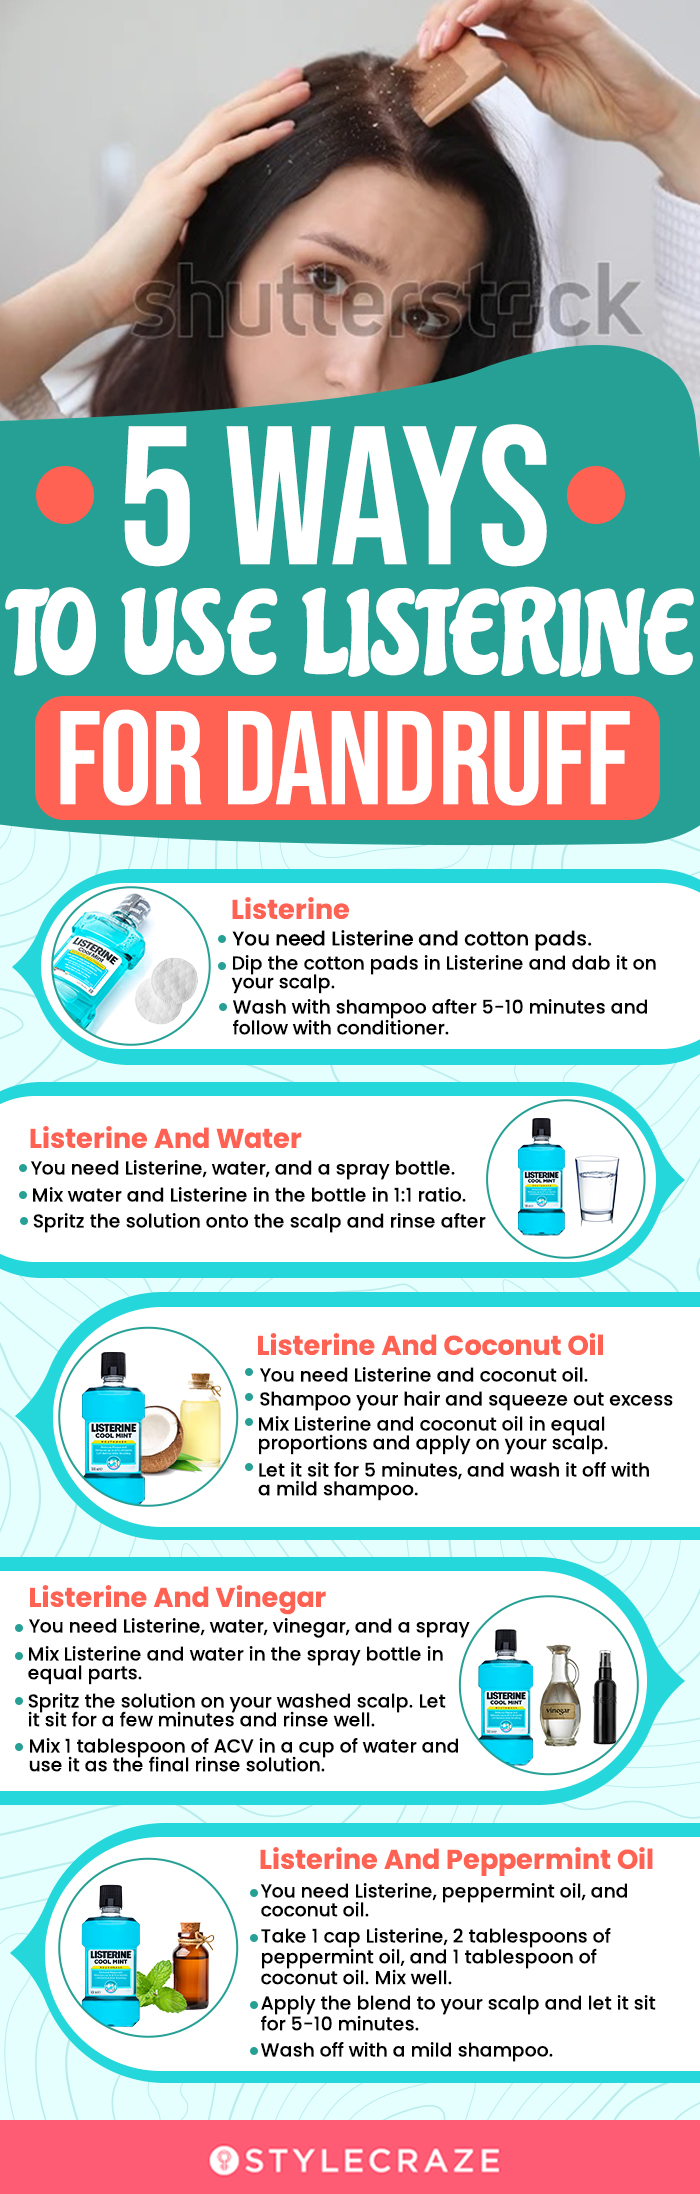 5 ways to use listerine for dandruff (infographic)